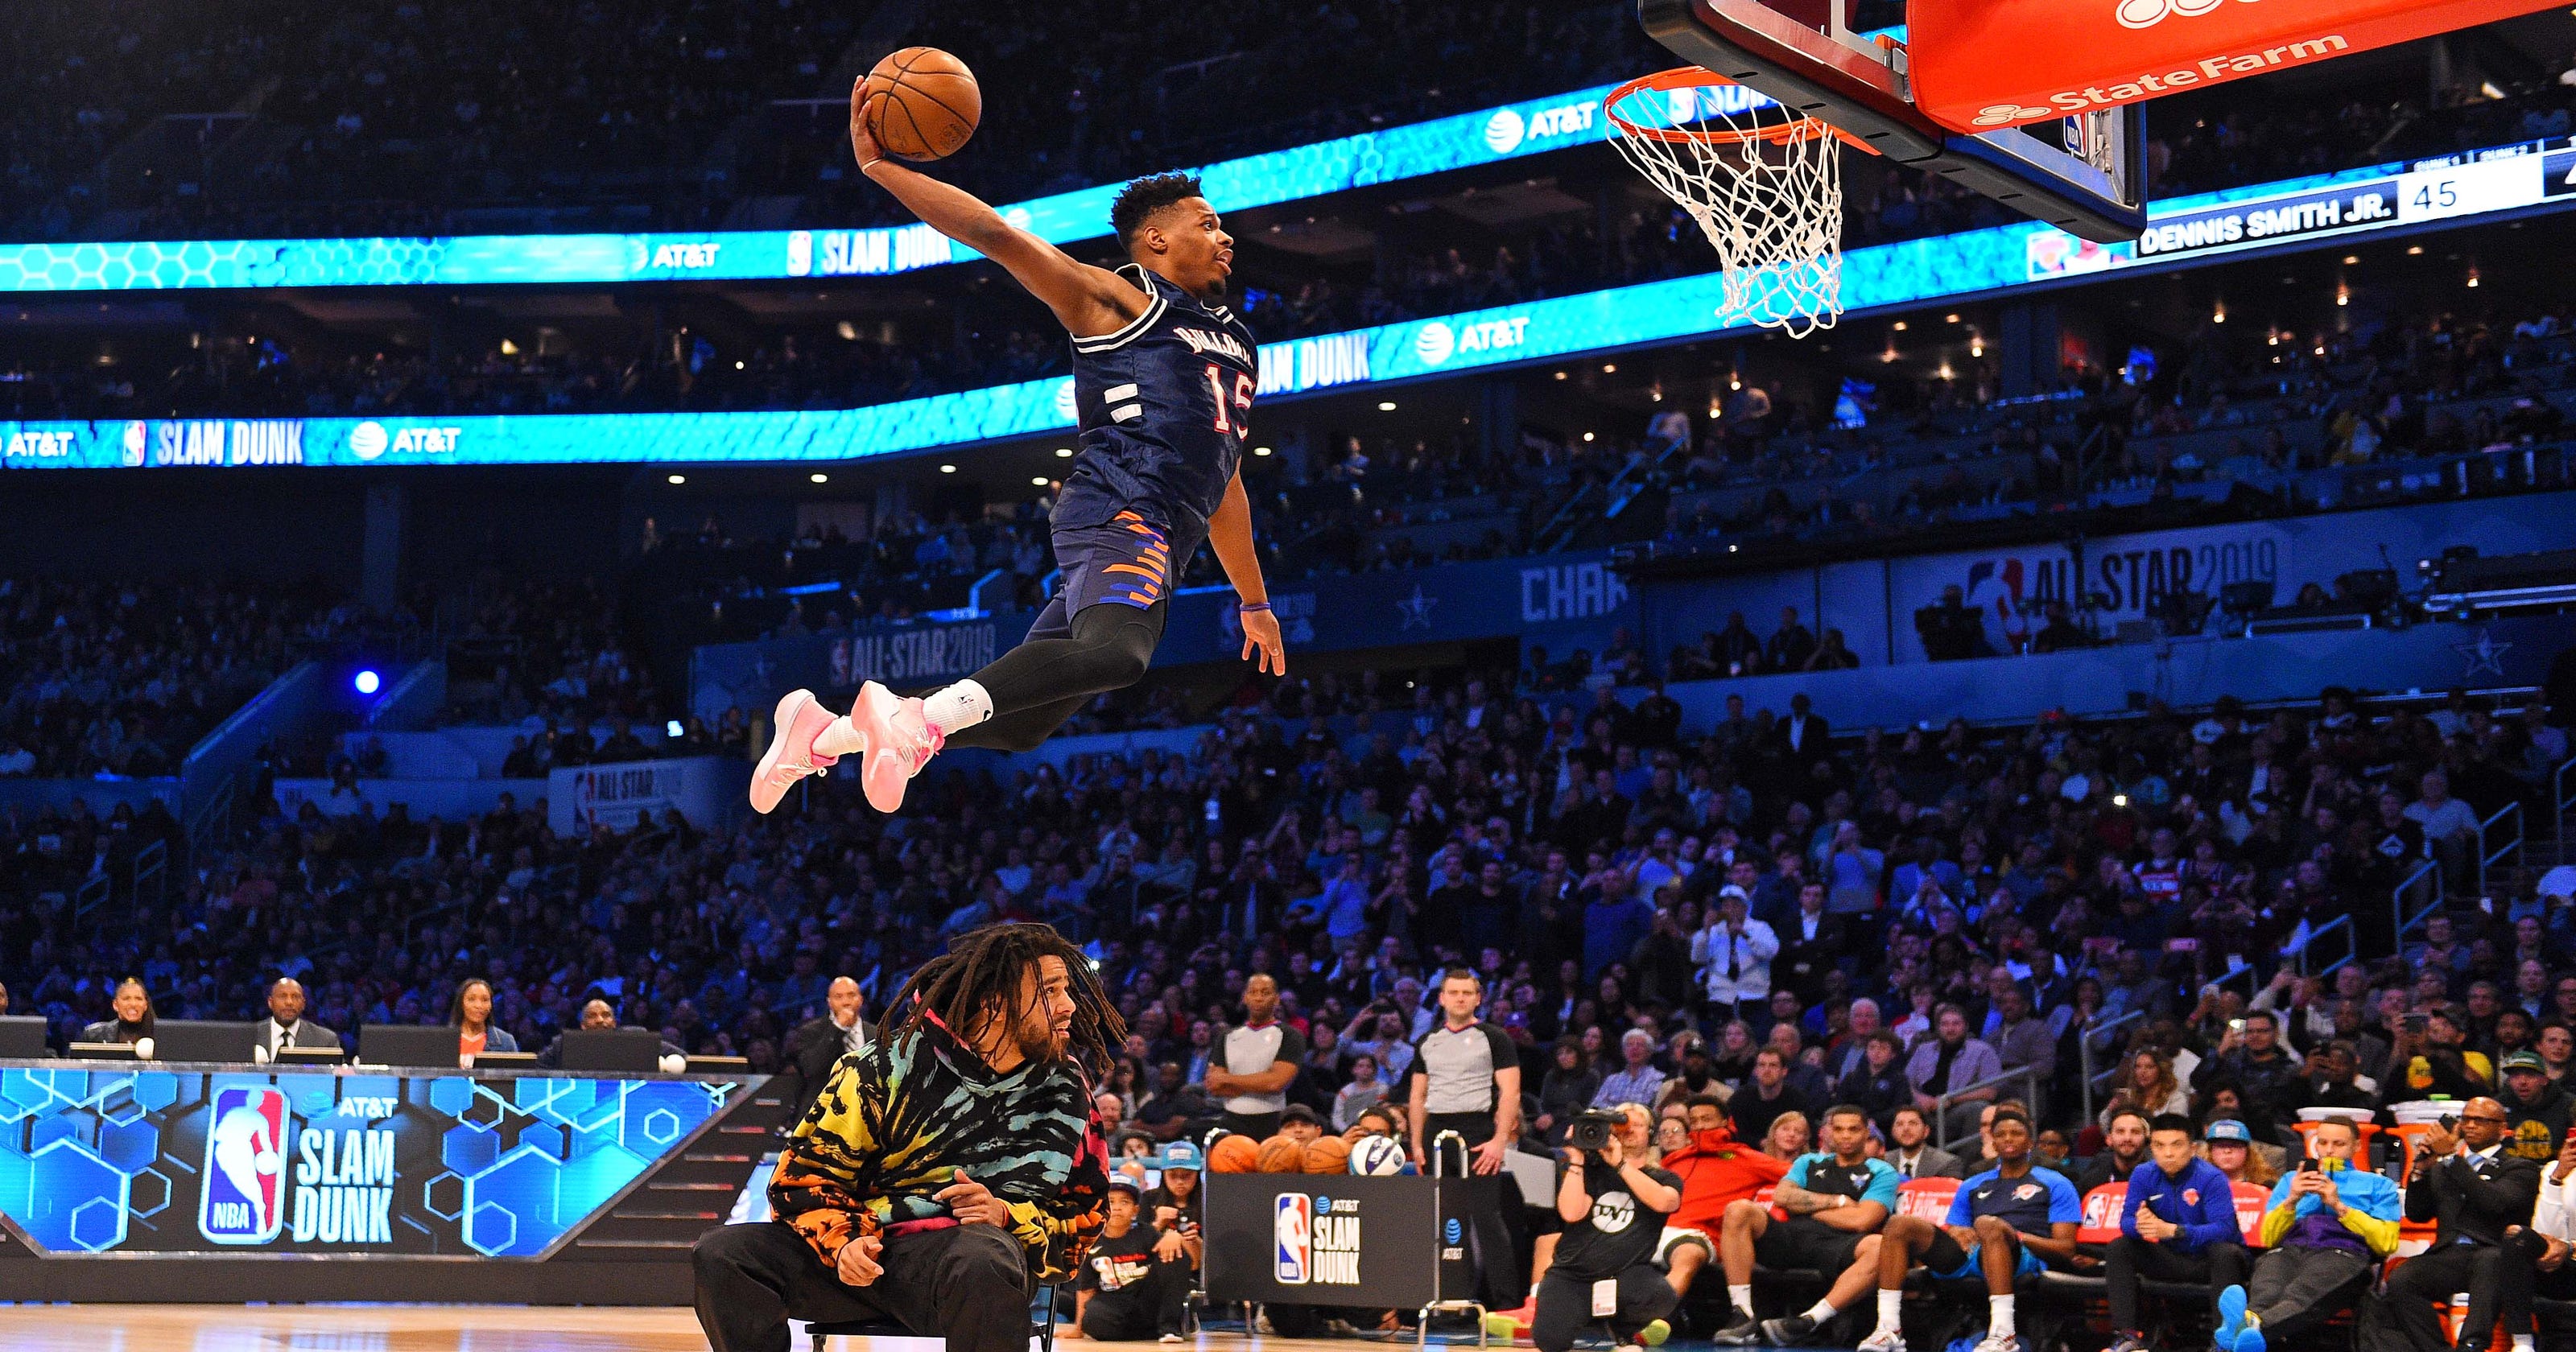 NBA AllStar Saturday Night Mustsee moments from Dunk Contest, etc.